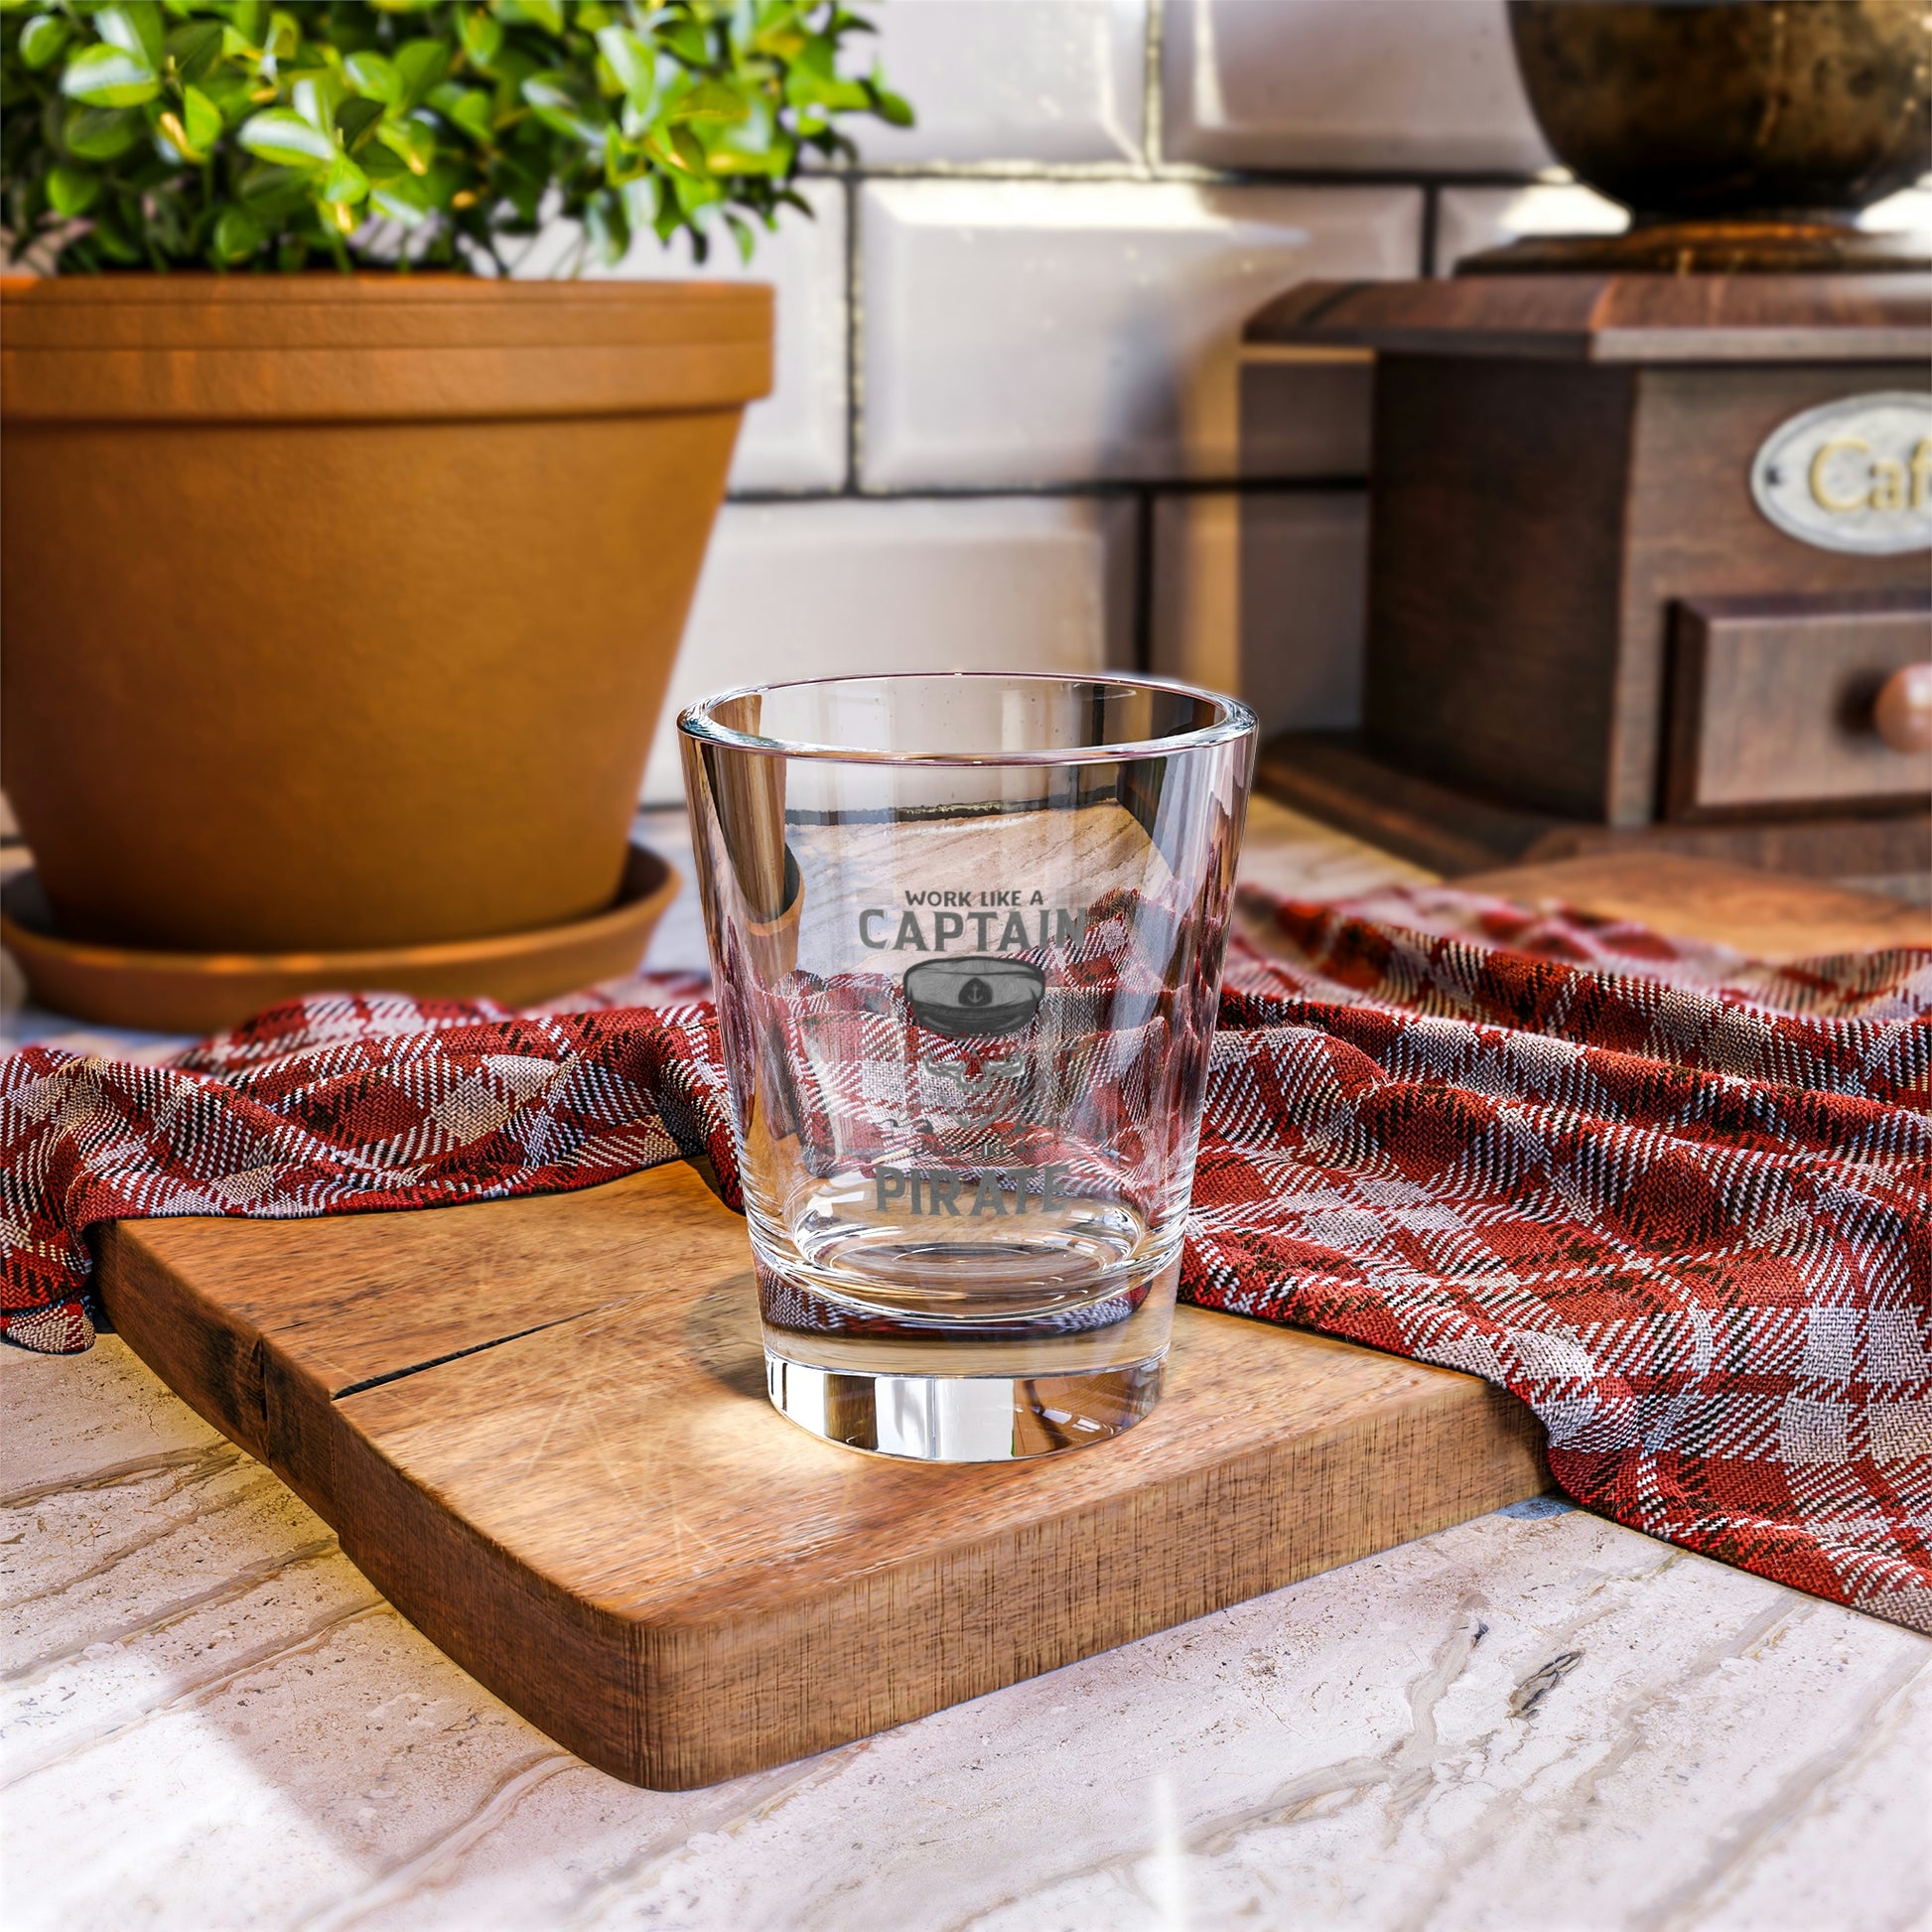 Inspirational pirate-themed shot glass for adventure lovers